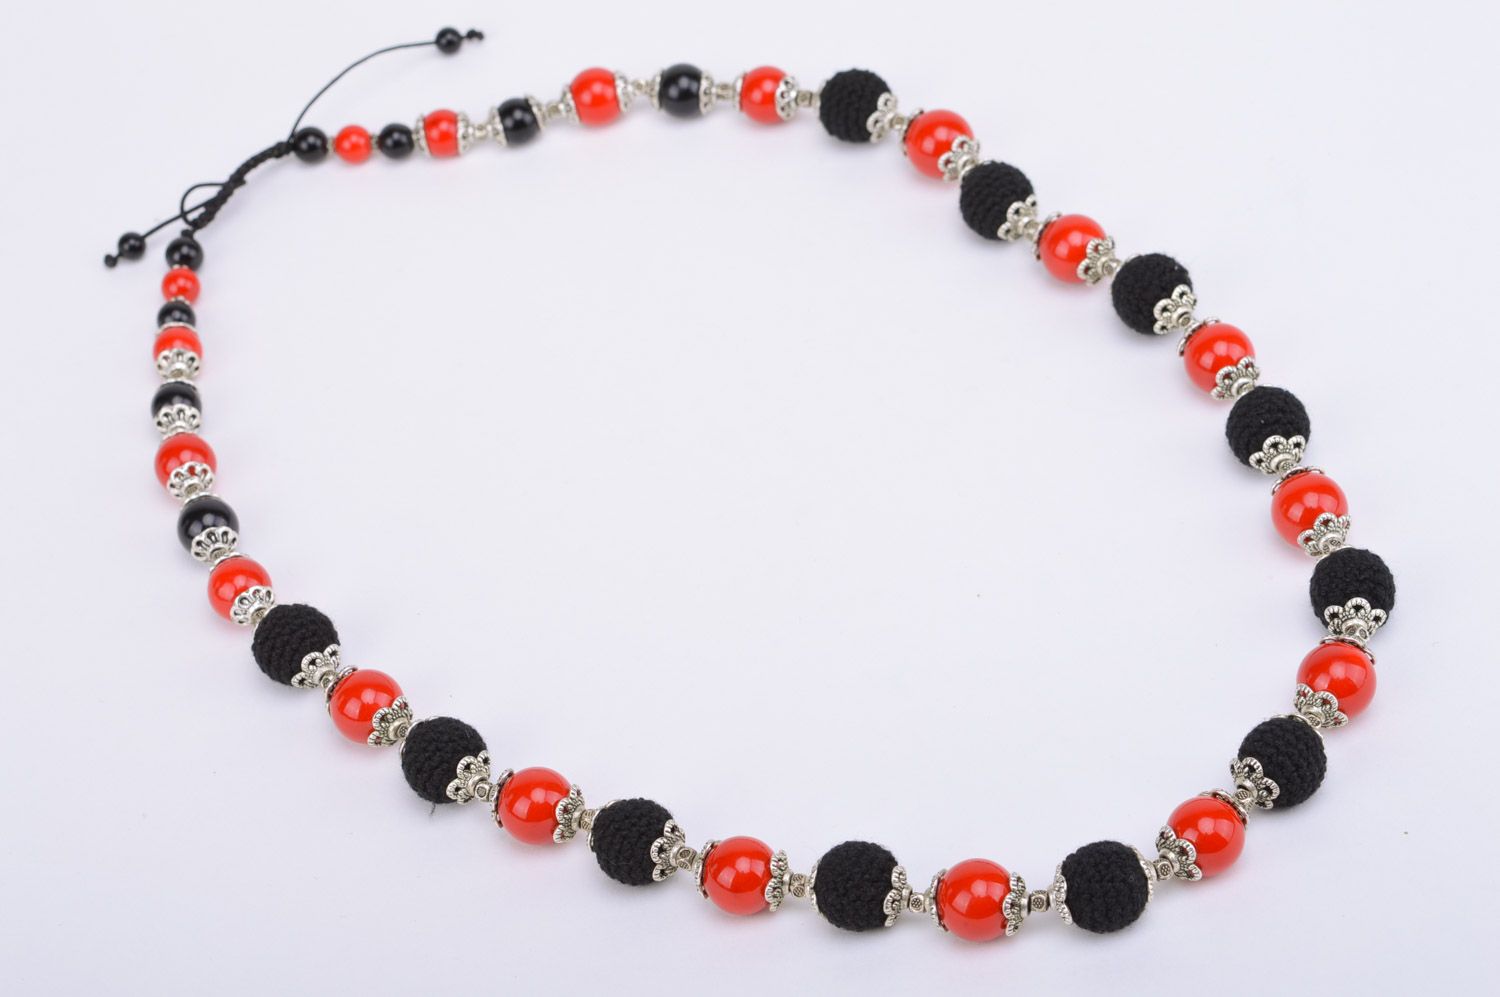 Handmade bright long necklace with crochet over beads of red and black colors photo 5